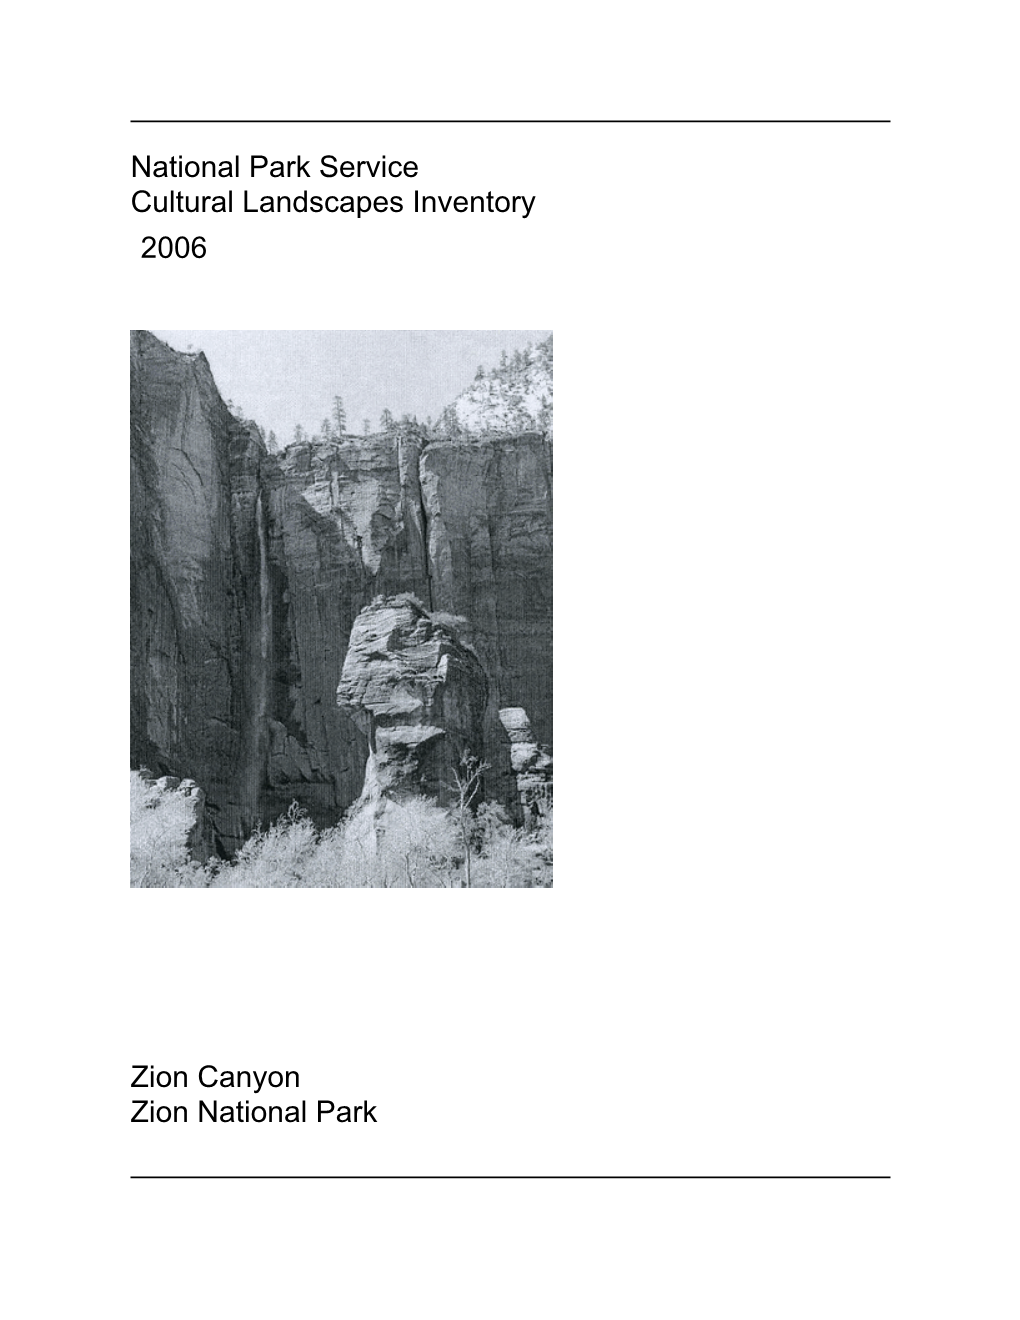 Cultural Landscapes Inventory: Zion Canyon